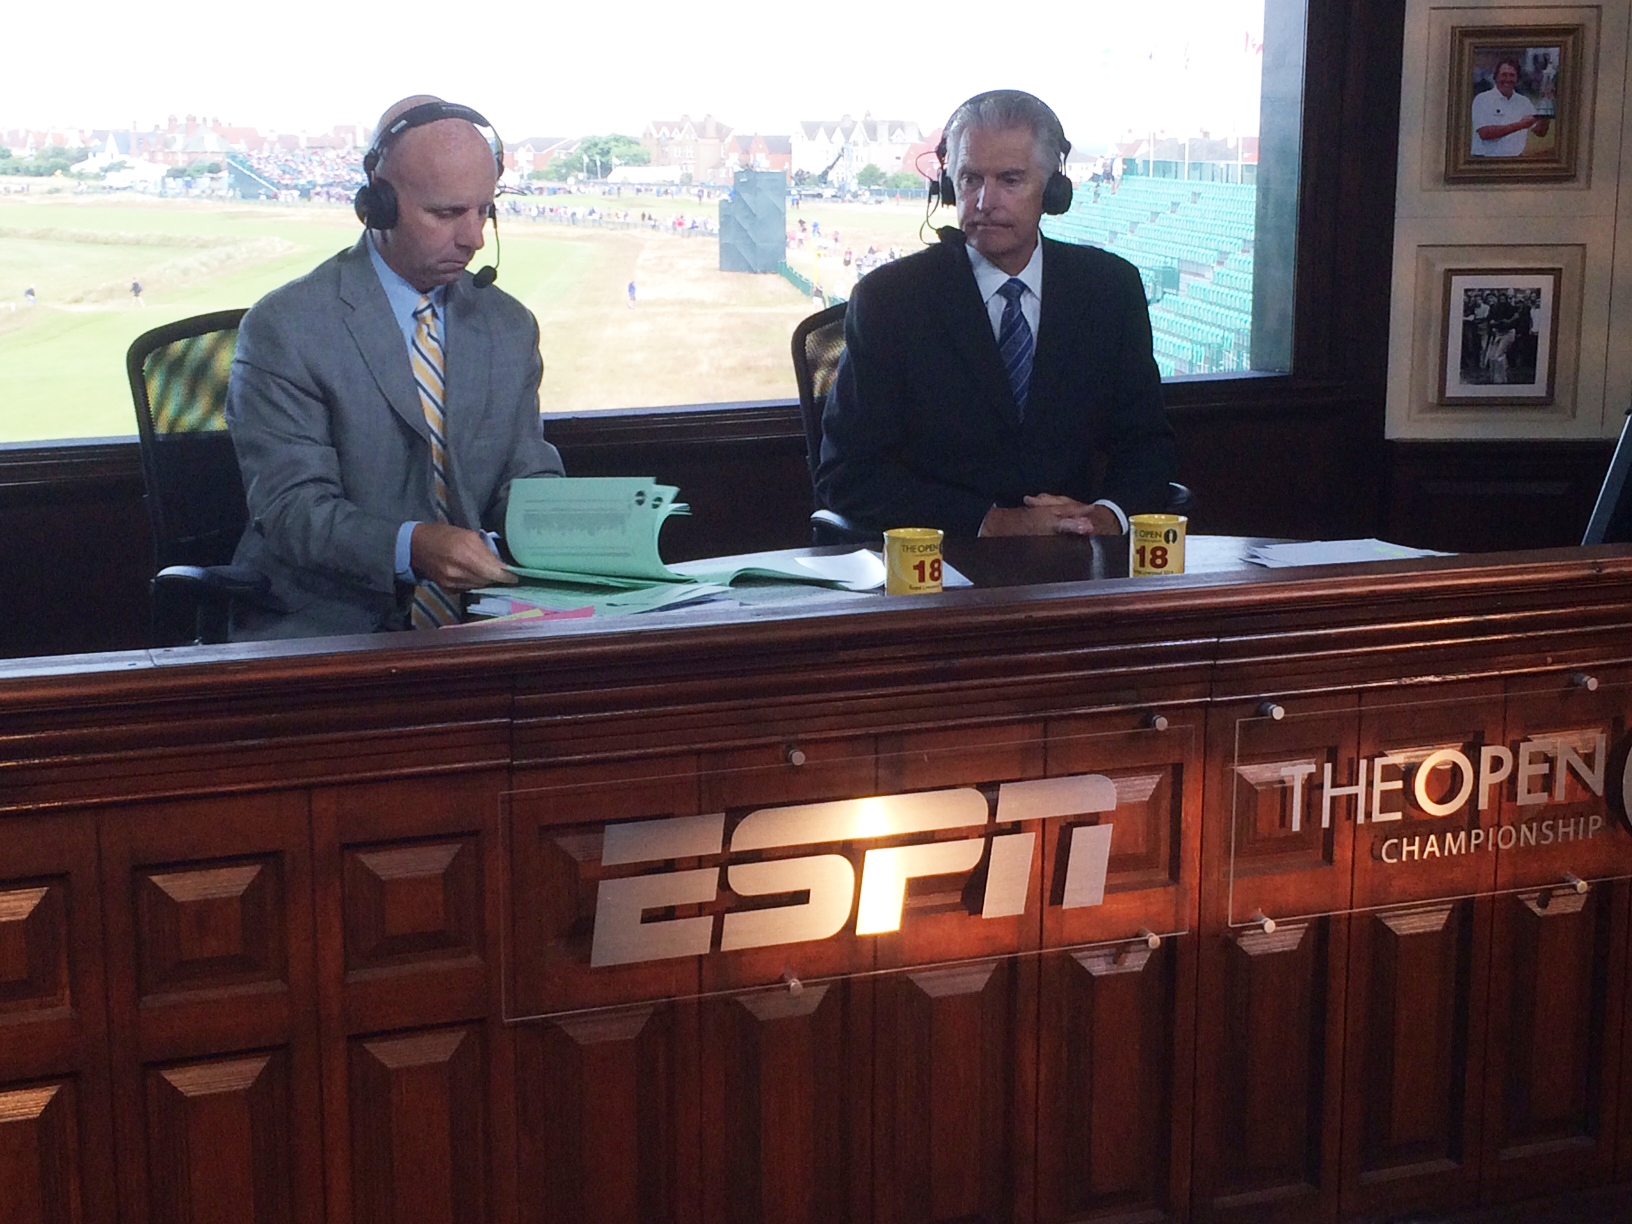 (L-R) Commentator Sean McDonough and analyst Andy North together at The Open Championship last year. (Andy Hall/ESPN)